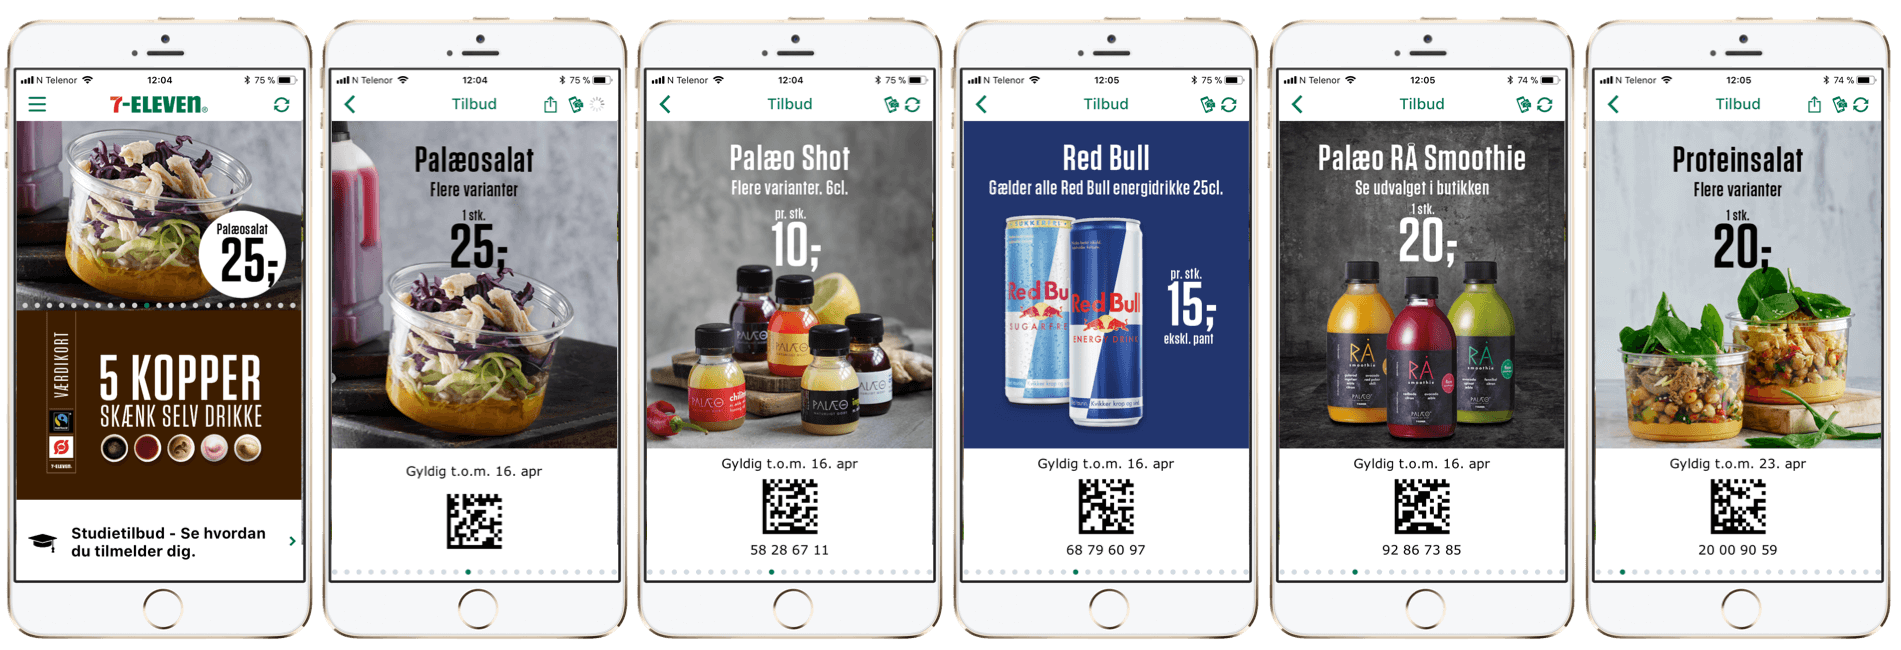 7 eleven app products